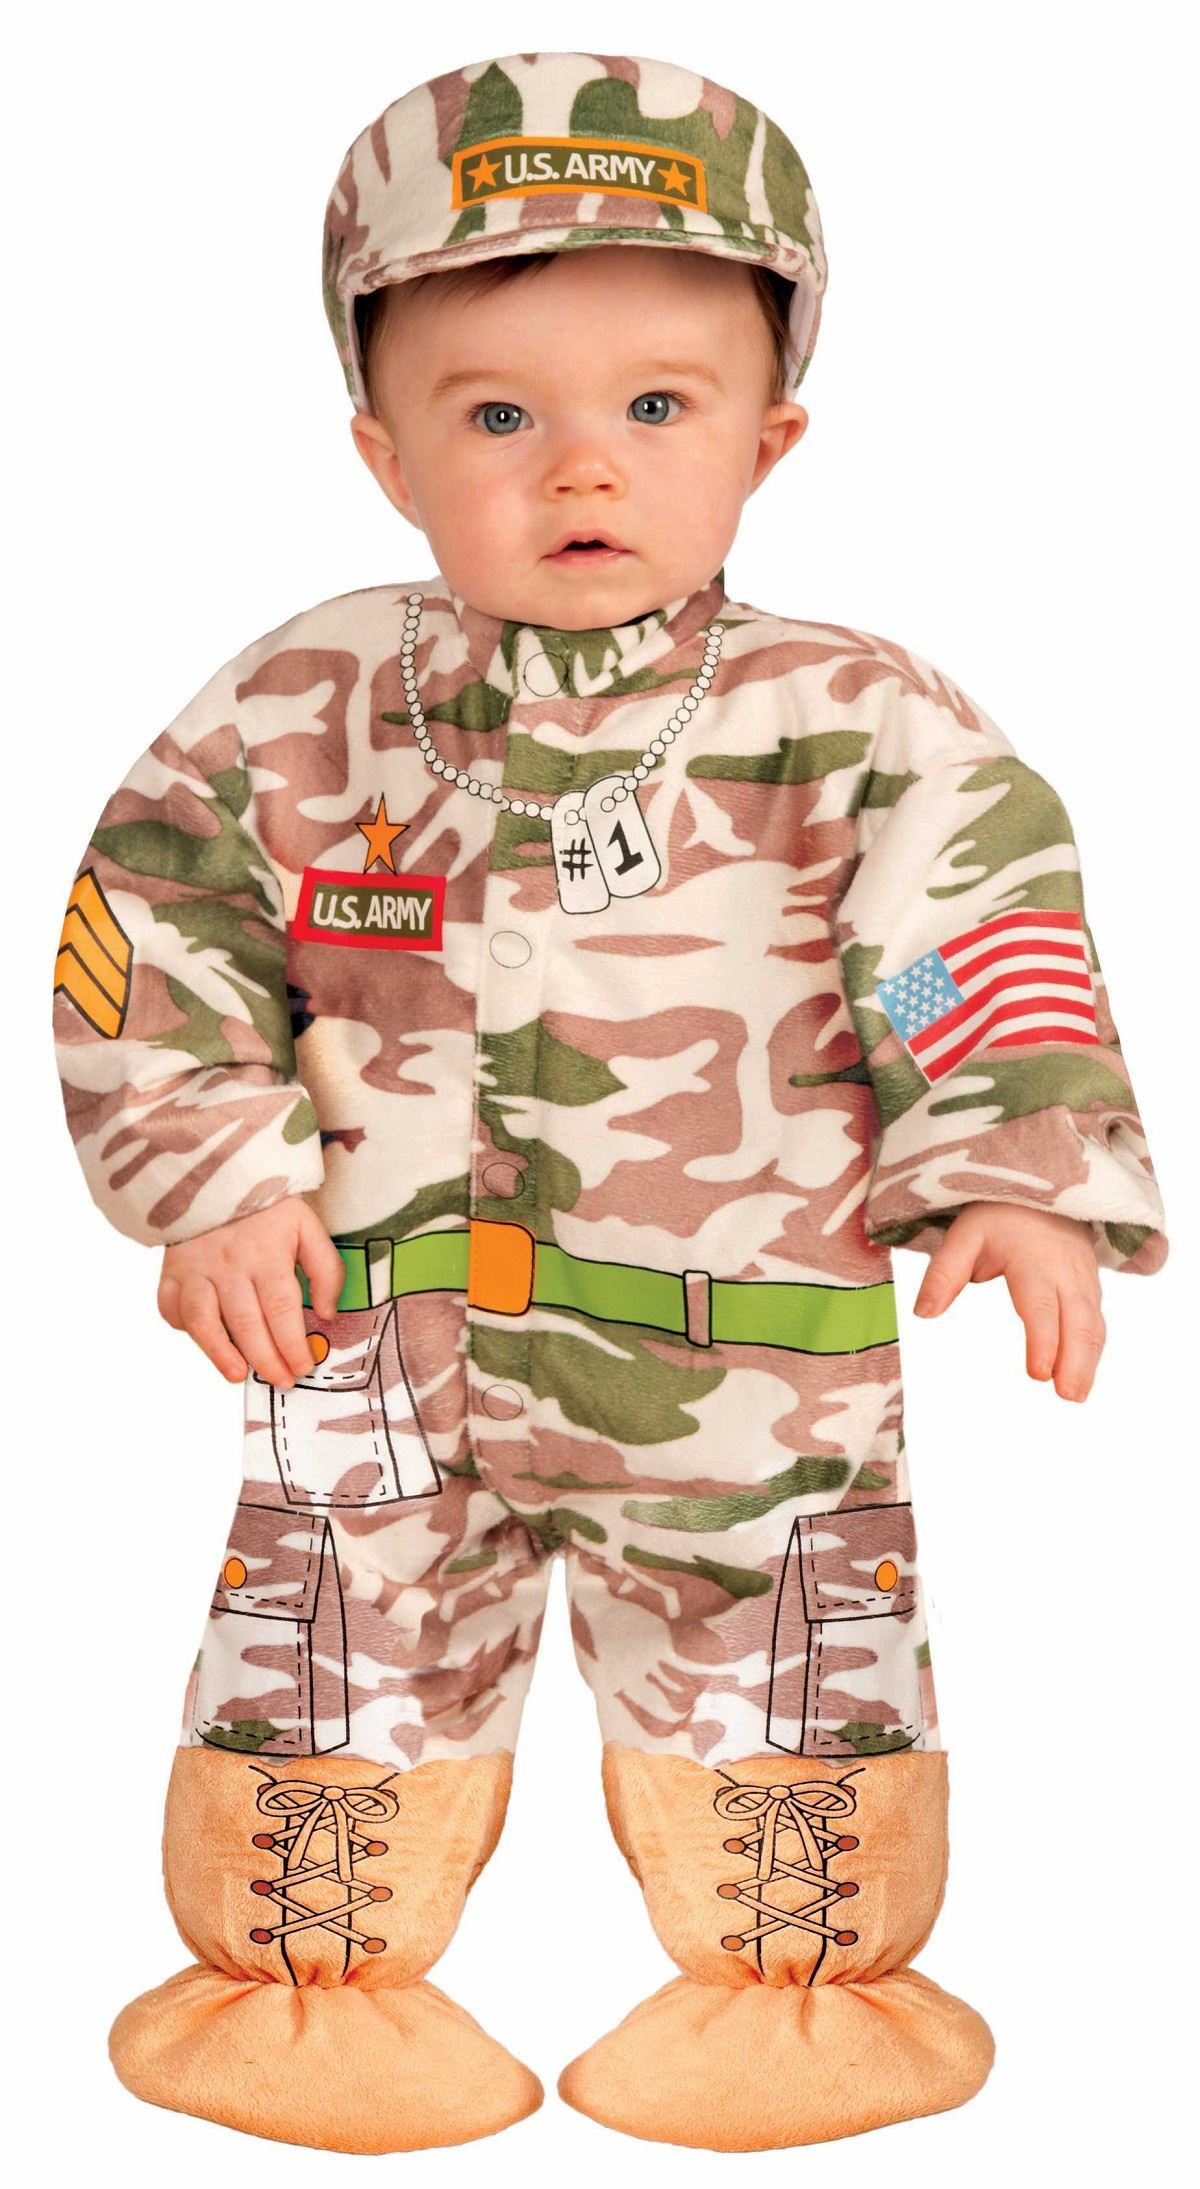 Kids Army Soldier Toddler Costume, $14.99